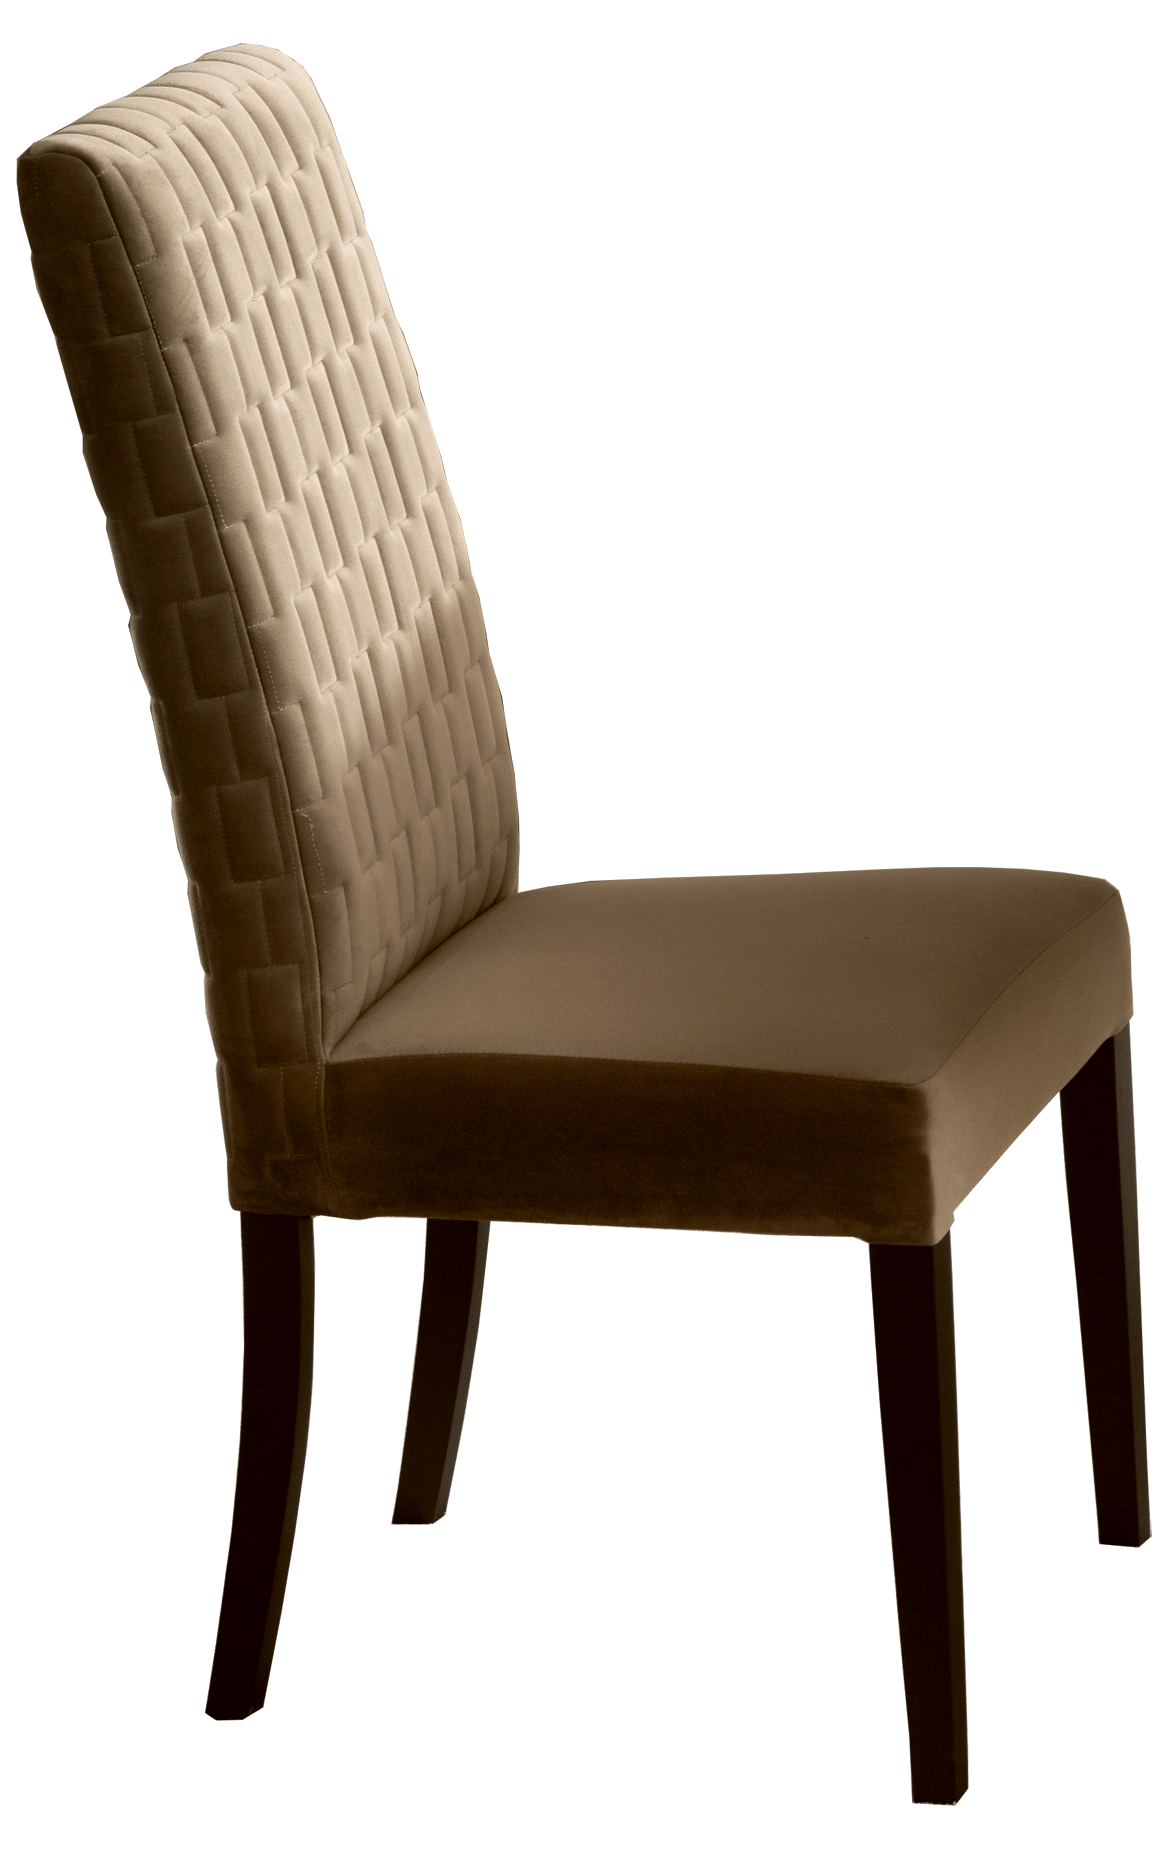 Dining Room Furniture Modern Dining Room Sets Poesia Dining Chair by Arredoclassic